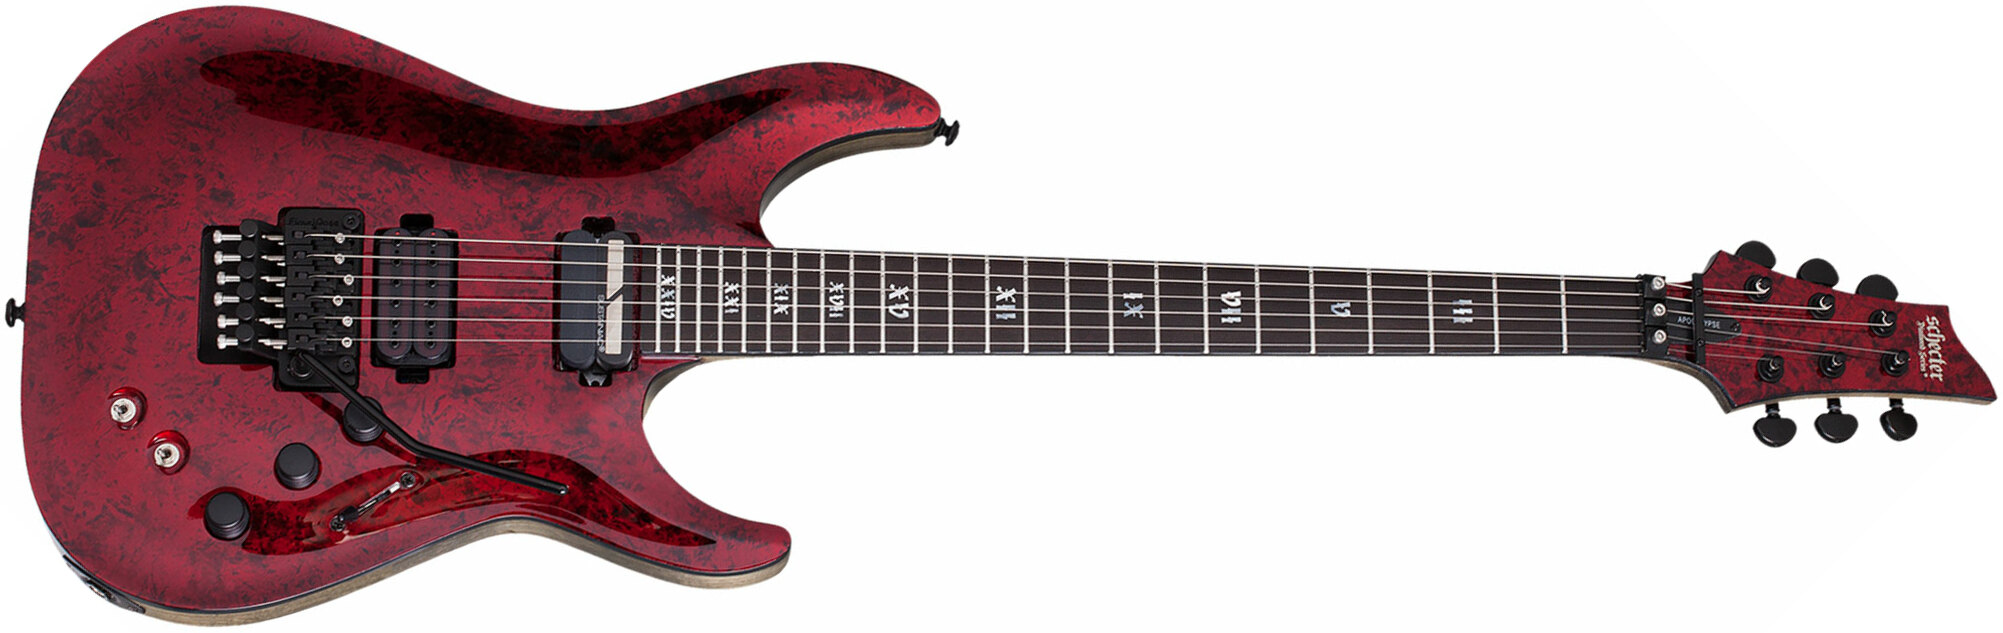 Schecter Apocalypse C-1 Fr S 2h Sustainiac - Red Reign - Double cut electric guitar - Main picture